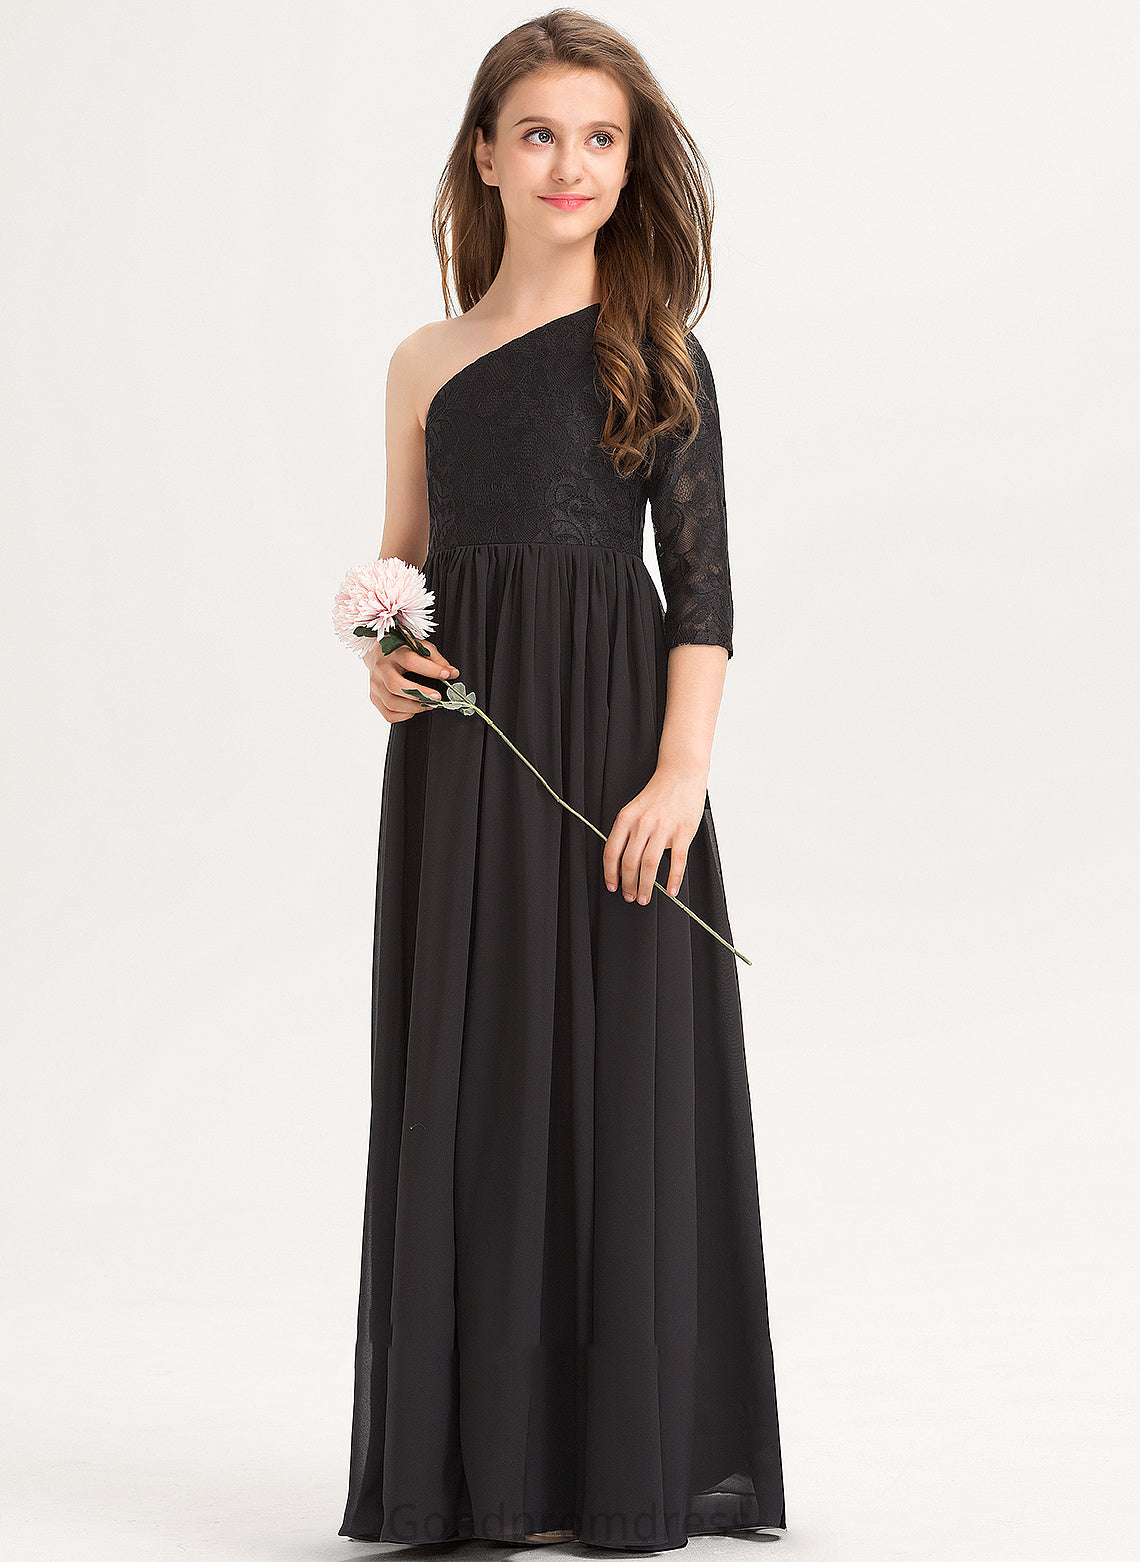 Aaliyah Lace Floor-Length Junior Bridesmaid Dresses Chiffon One-Shoulder A-Line